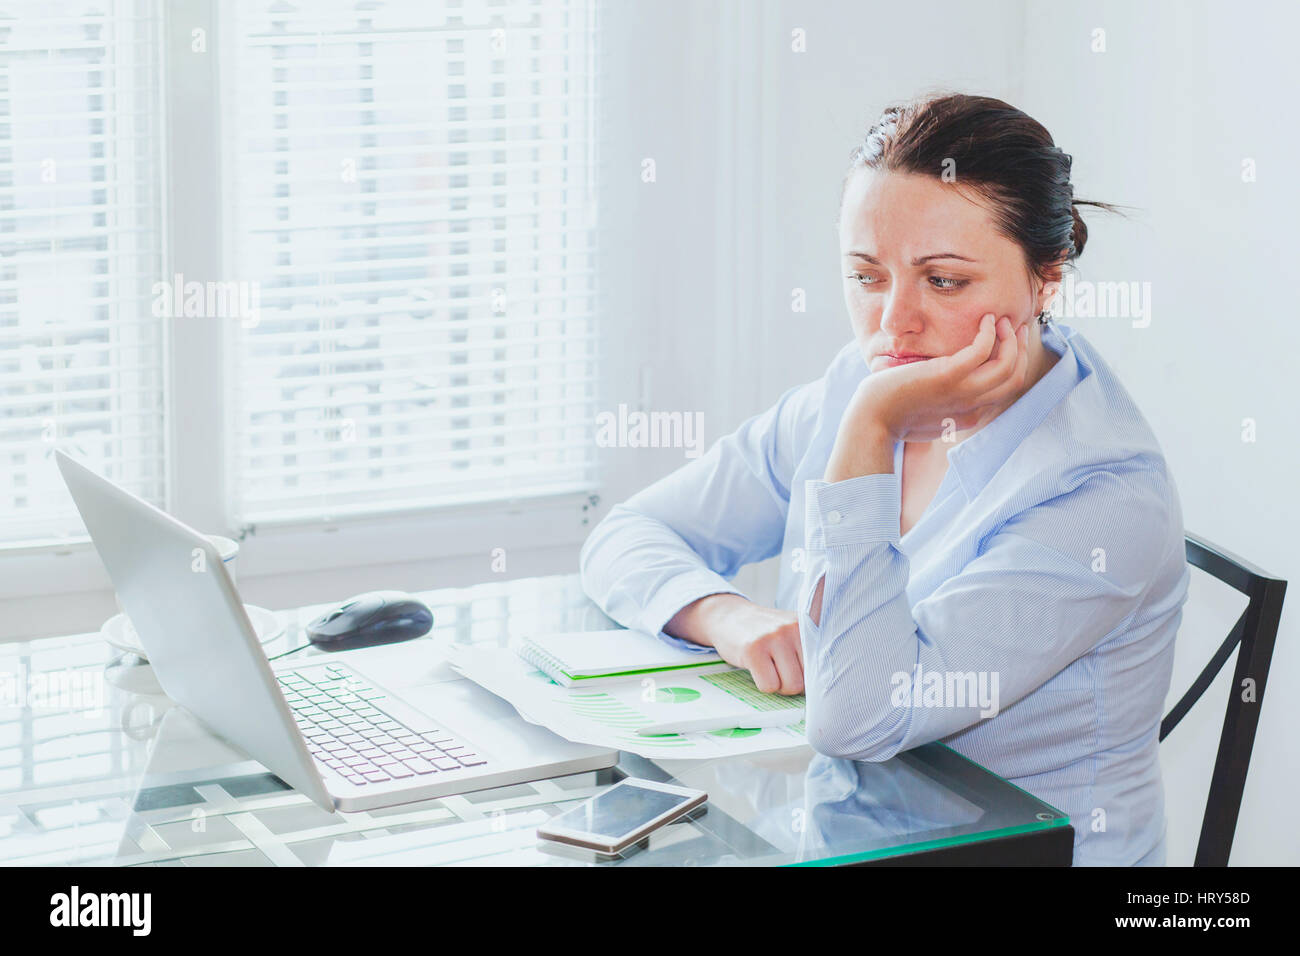 doubt concept, difficult job, business woman in front of complex project with big responsibility, scared uncertain employee in the office Stock Photo